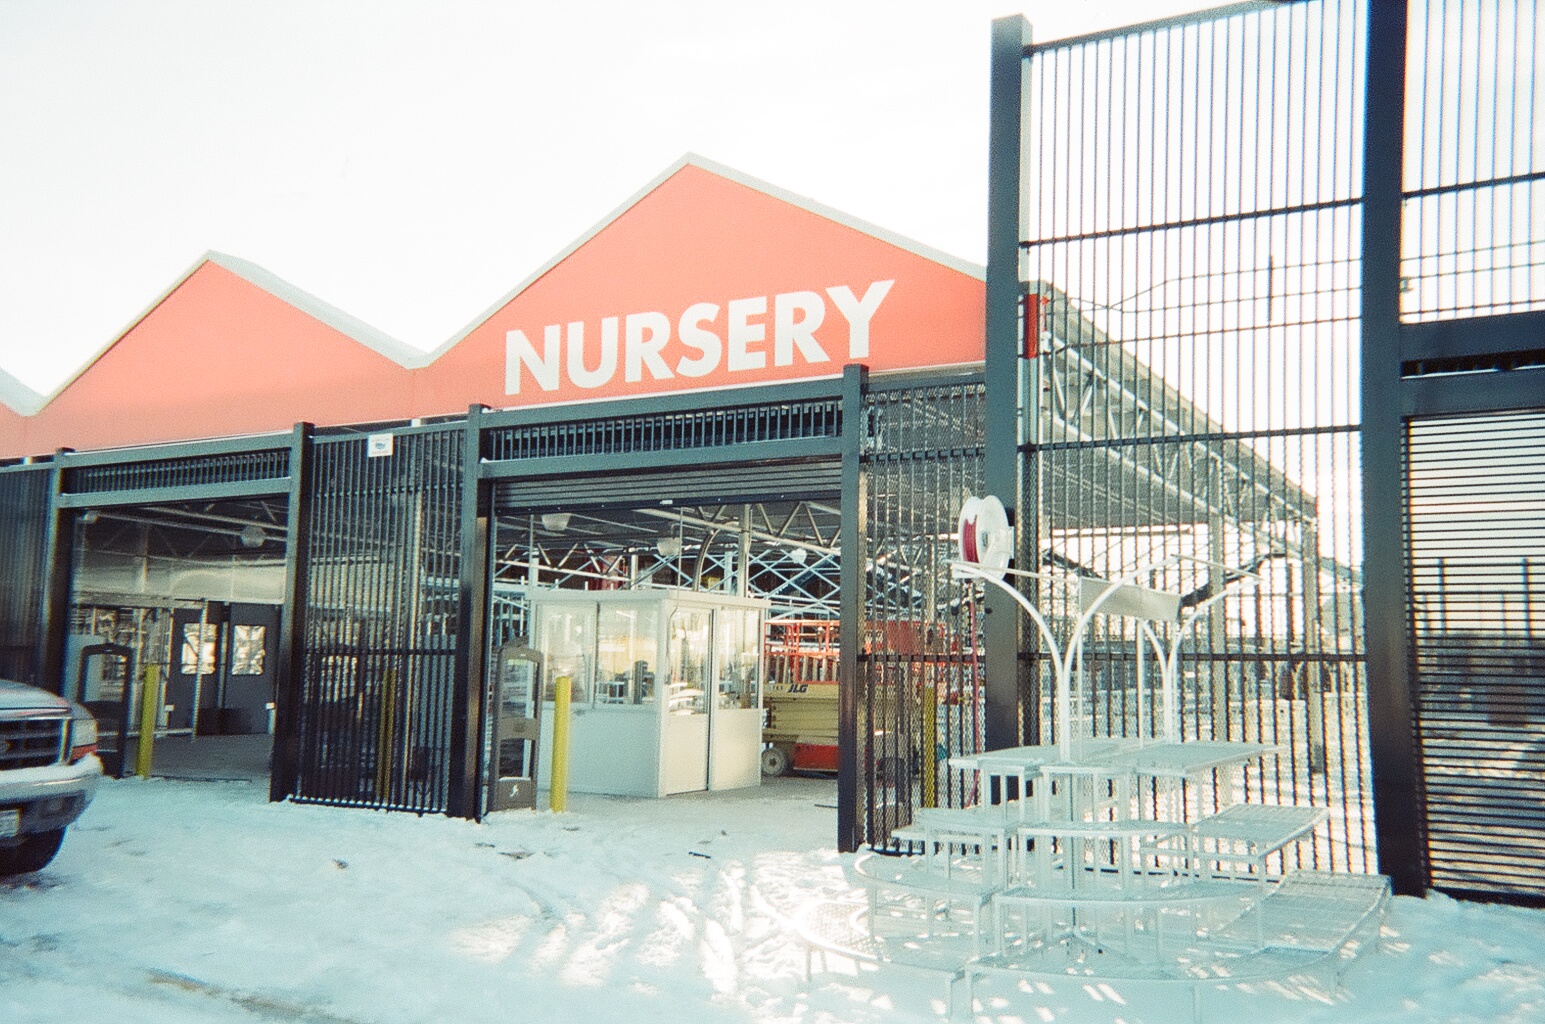 us-fence-and-gate-home-depot-nursery